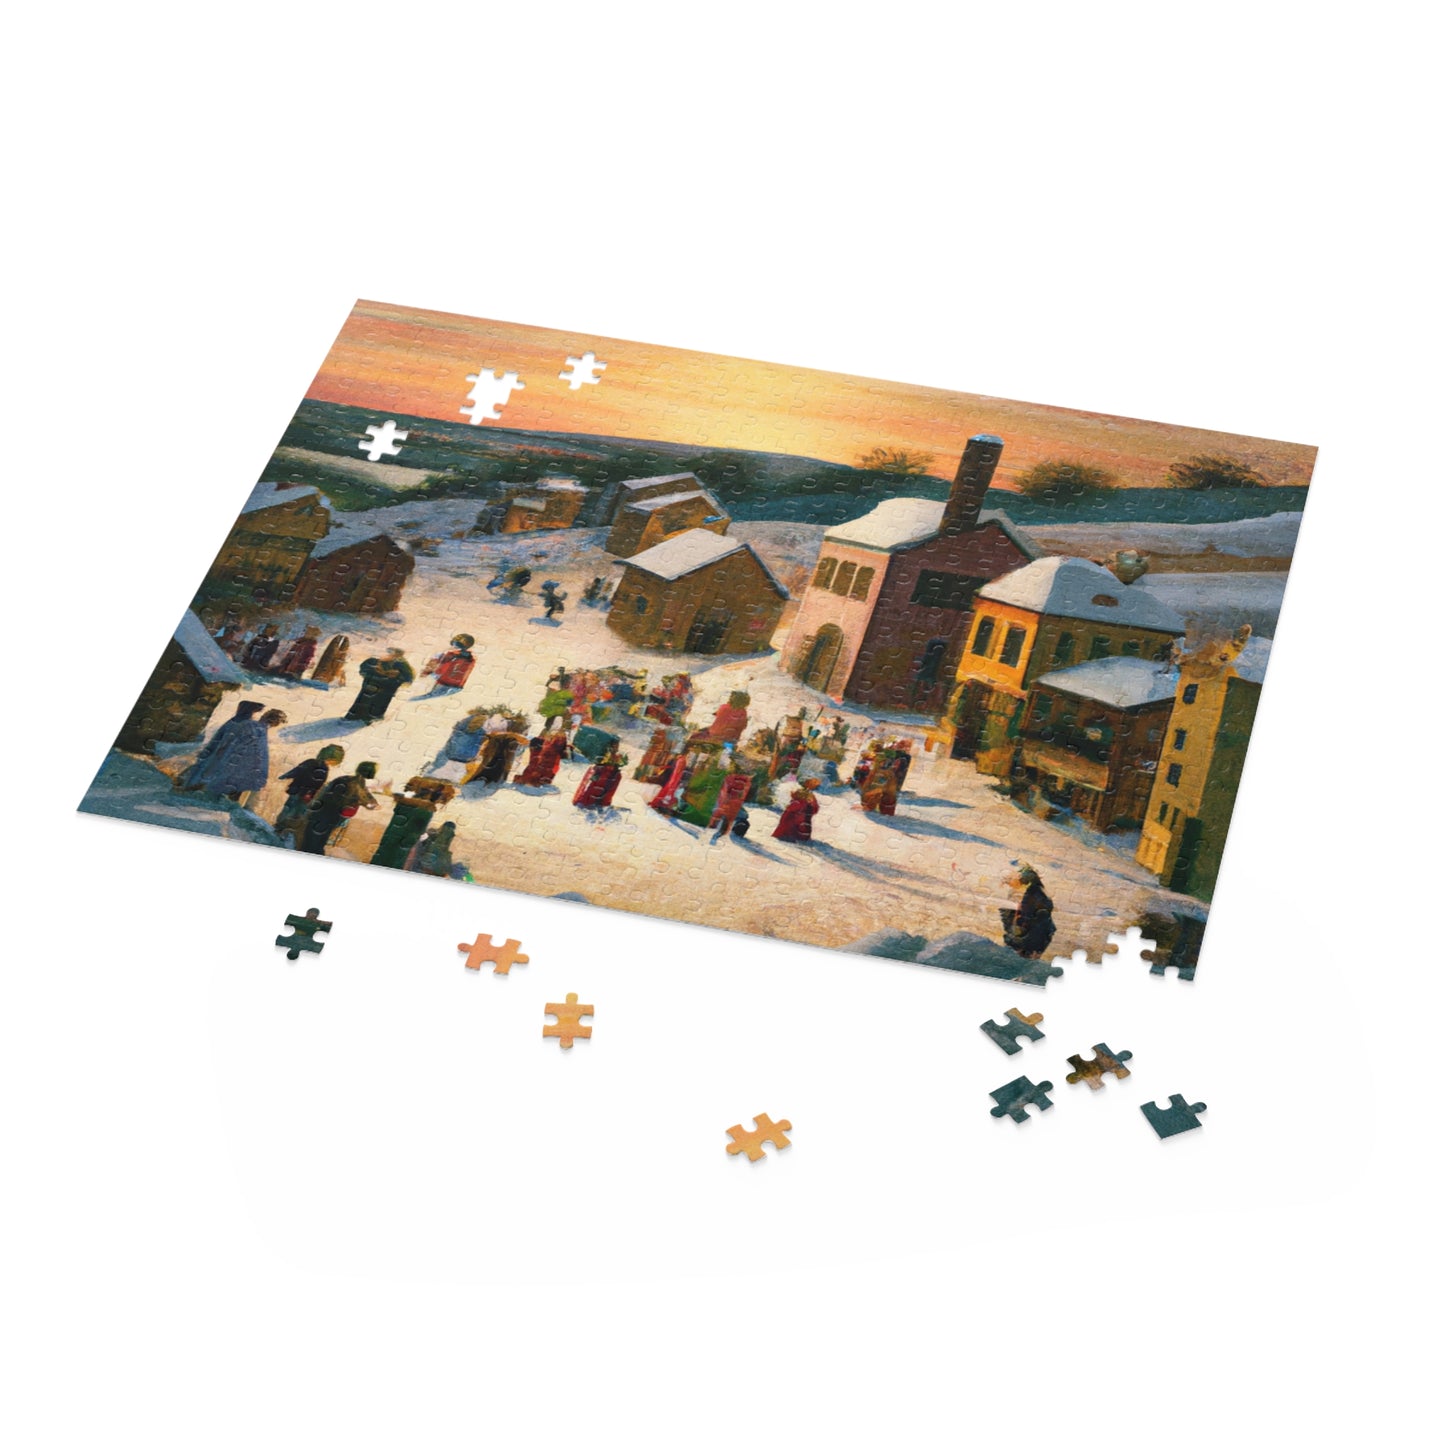 Vintage Christmas Village - JigSaw Puzzle 500 Piece: Victorine Noel - Christmas Gift | Holiday Scenes